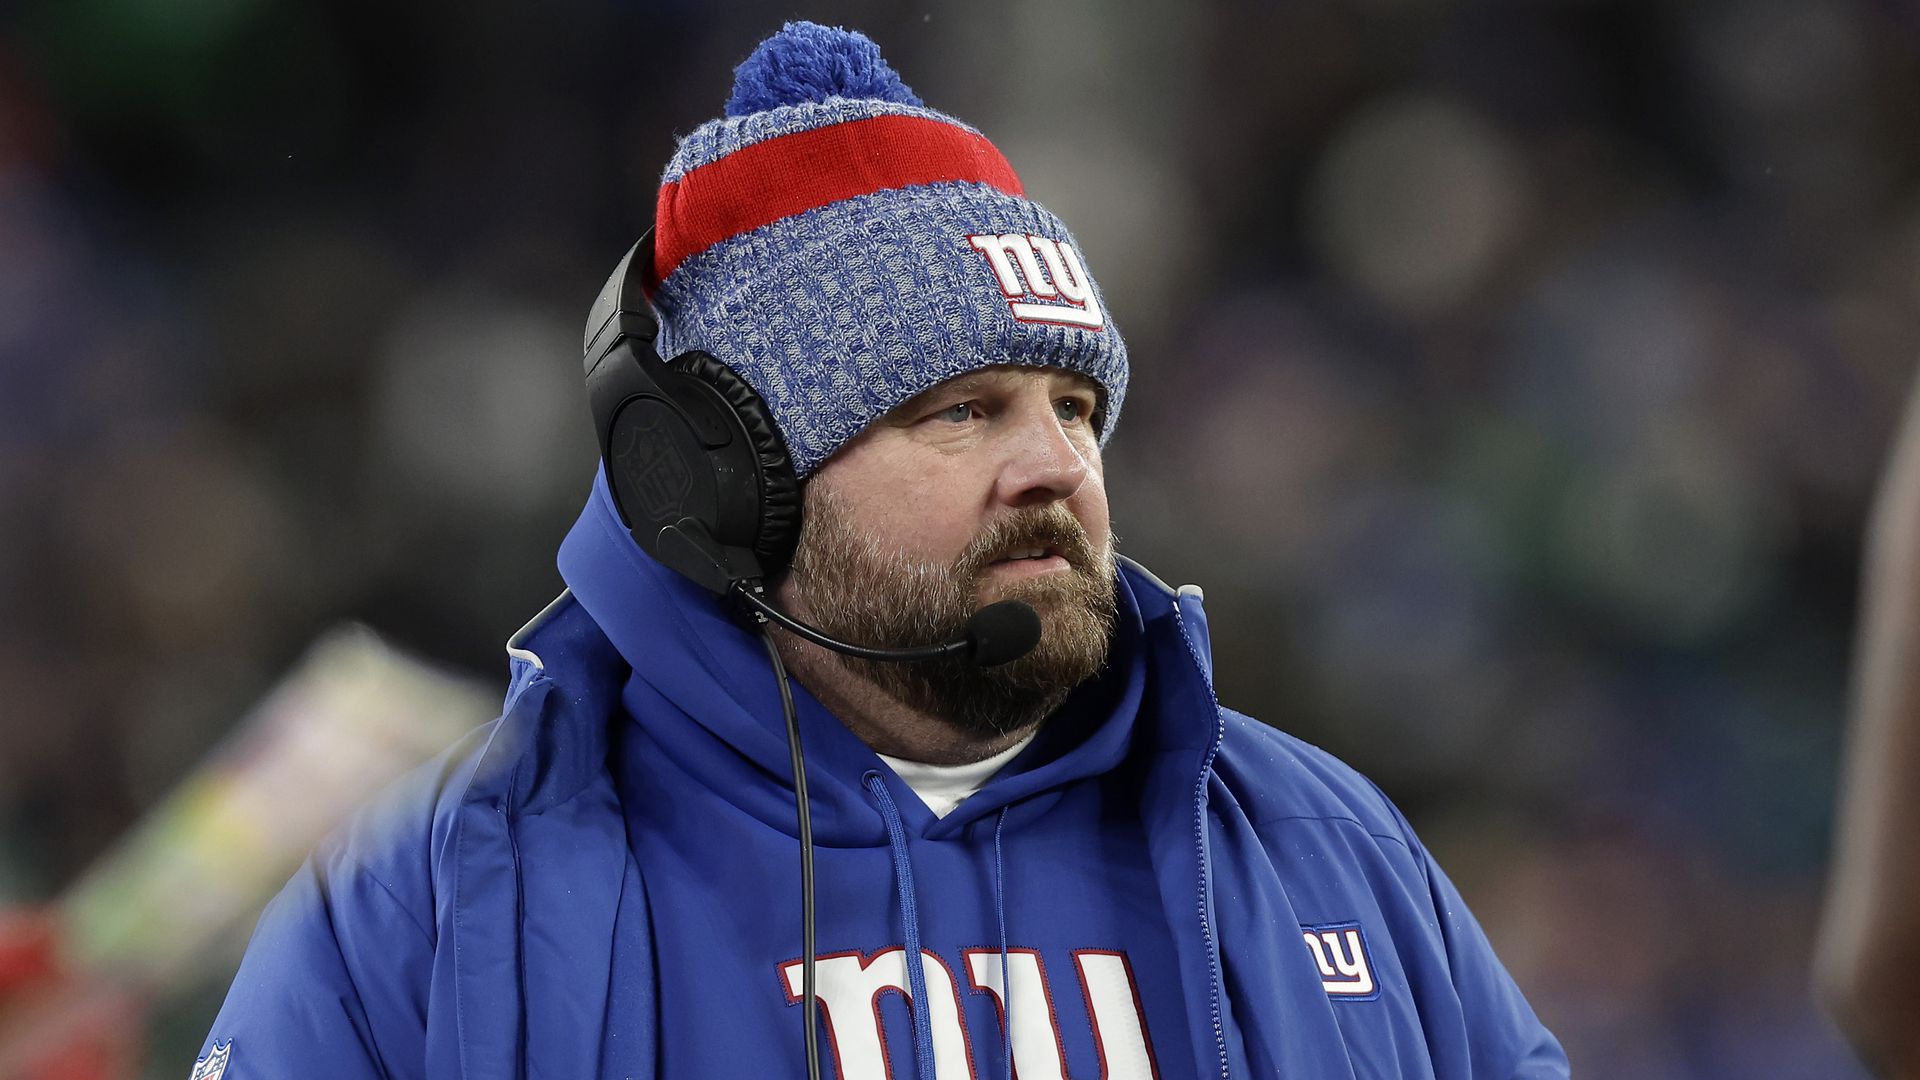 nfc east news: brian daboll challenges in new york, eagles sign pending free agent te